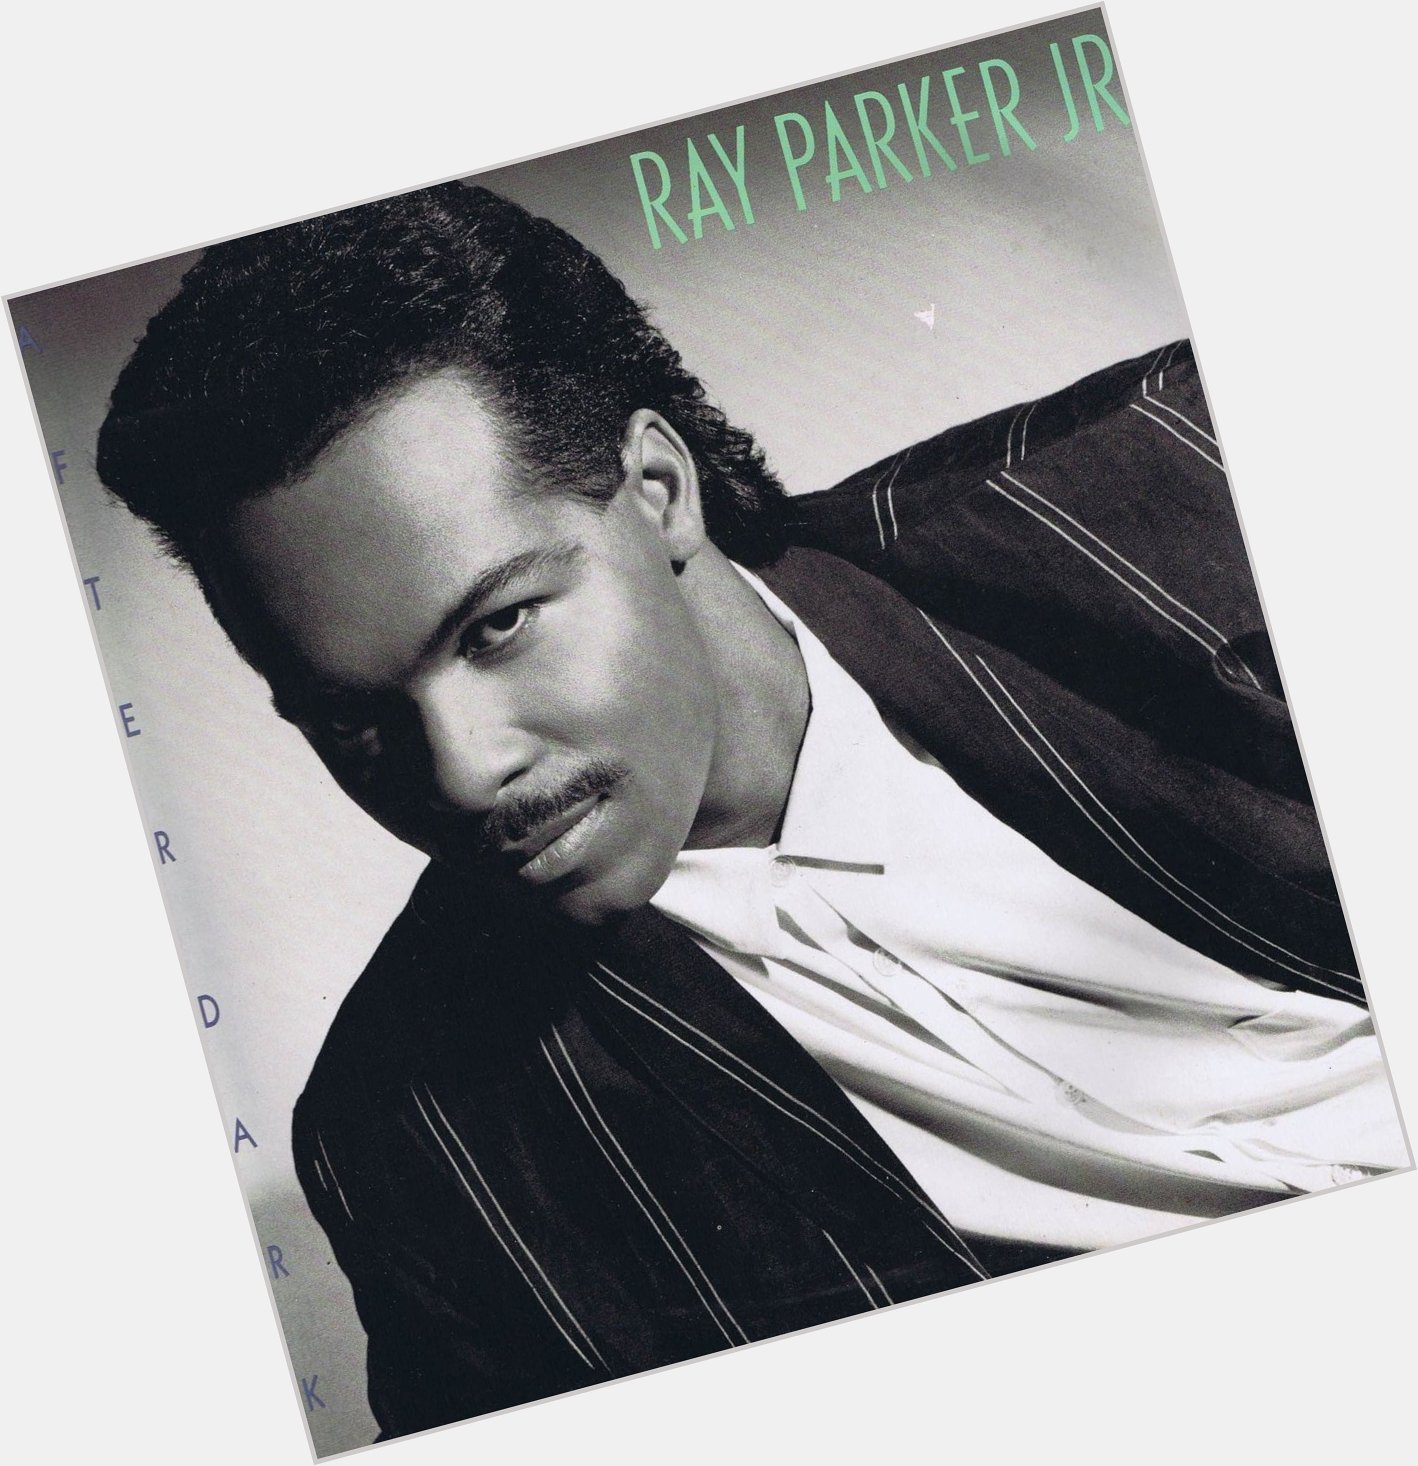 Happy birthday to American musician, singer, songwriter, record producer and actor Ray Parker Jr., born May 1, 1954. 